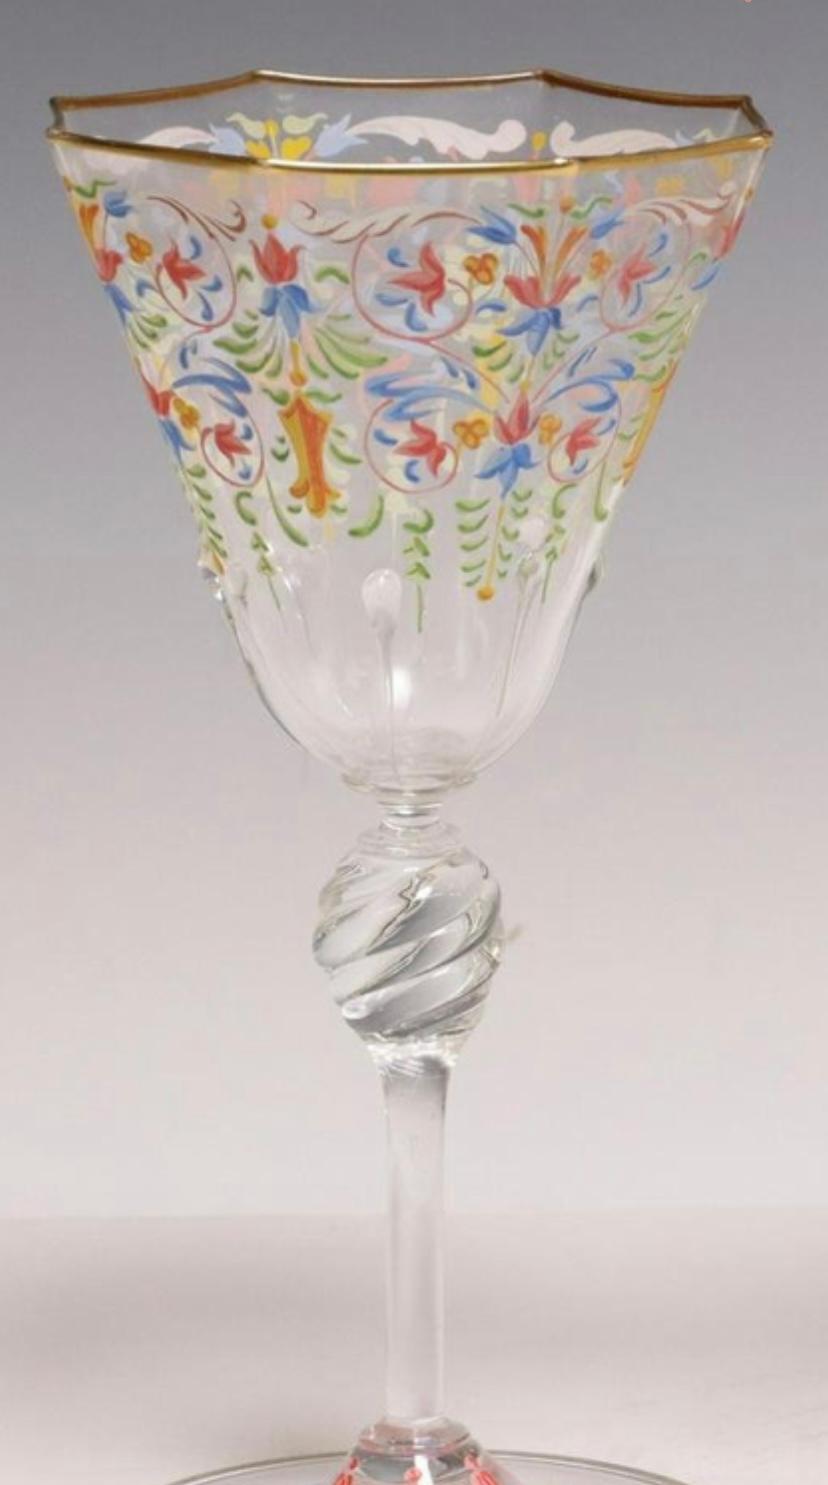 Hand-Crafted A Set of 11 Antique Venetian Goblets, Beautiful Enamel Work & Knob Stems